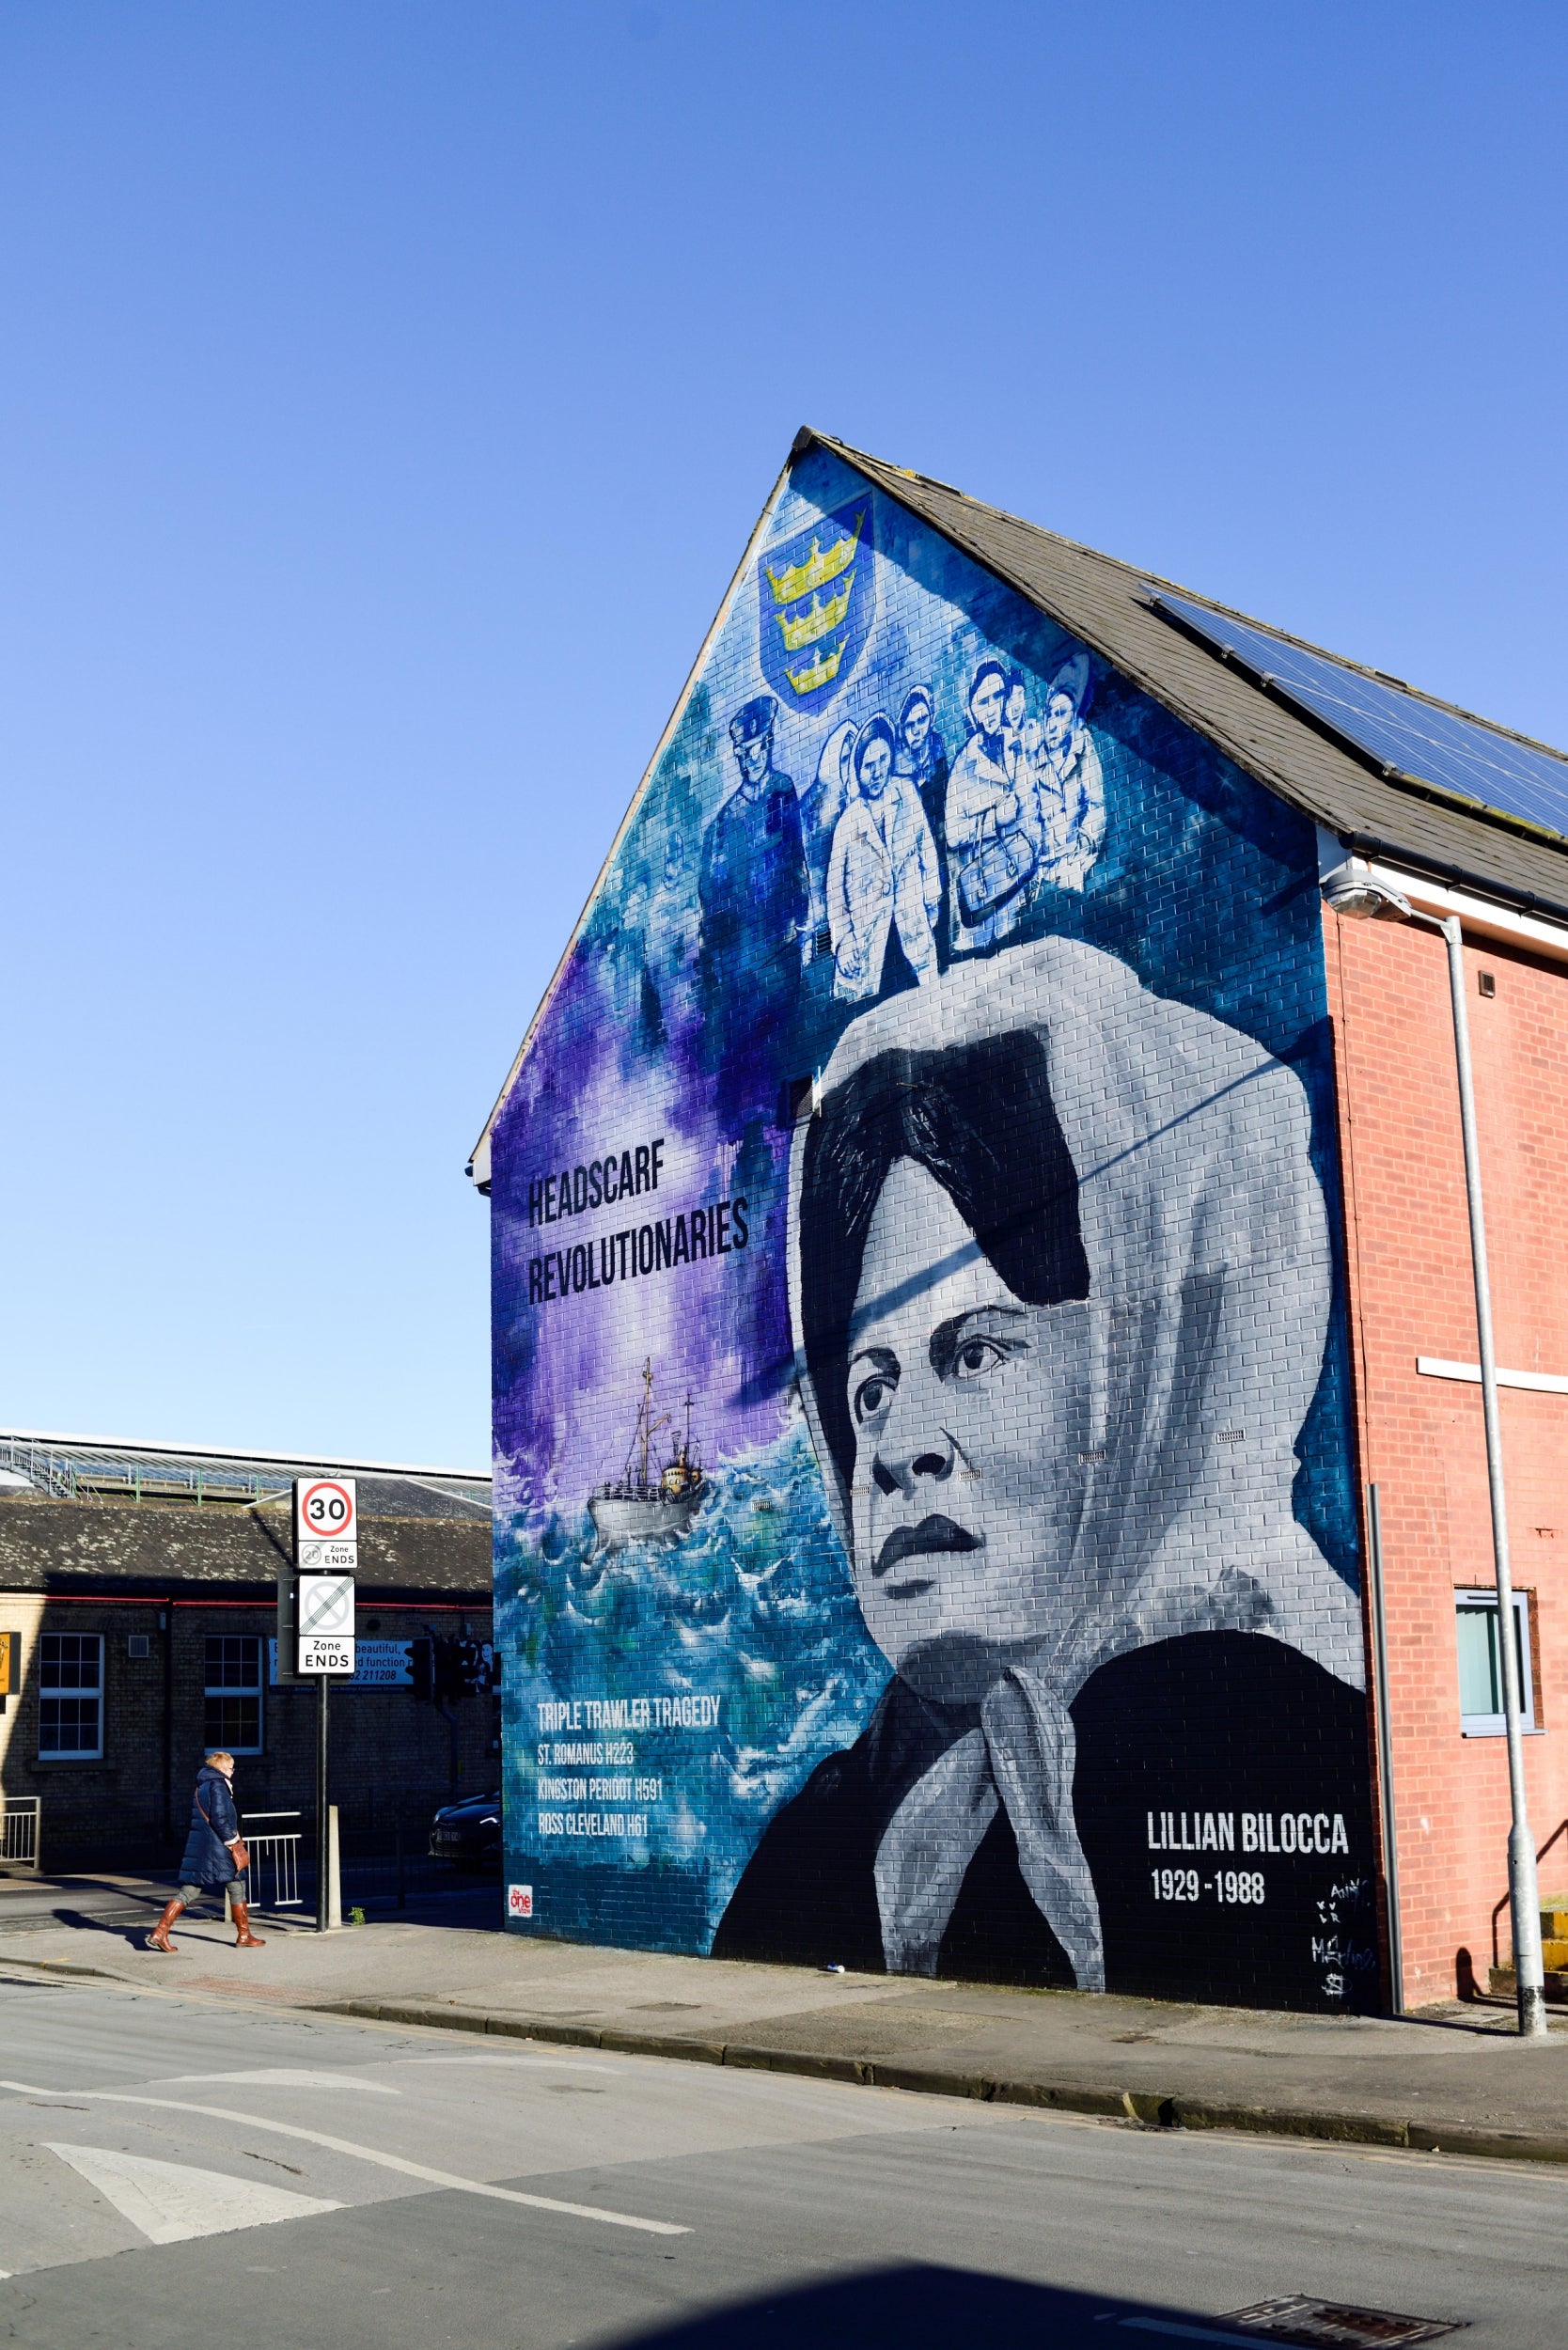 A mural in Hull honours the ‘headscarf revolutionaries’ led by Lillian Bilocca, who demanded greater safety controls for fisherman